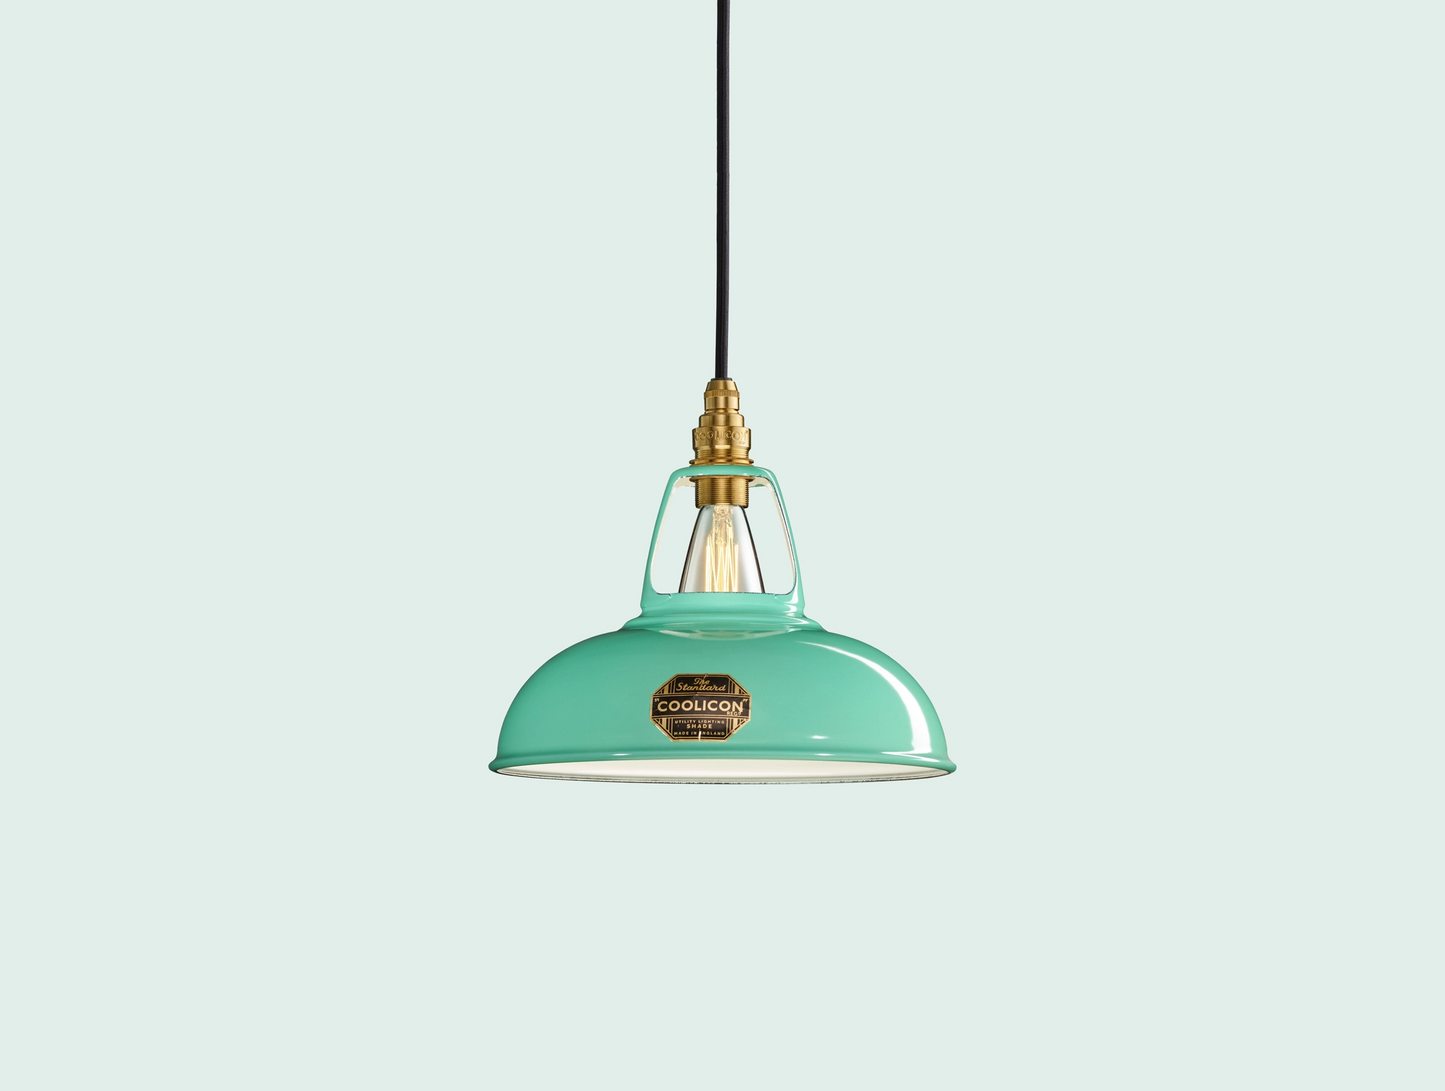 Fresh Teal Coolicon lampshade with a Porcelain pendant set over a light teal background